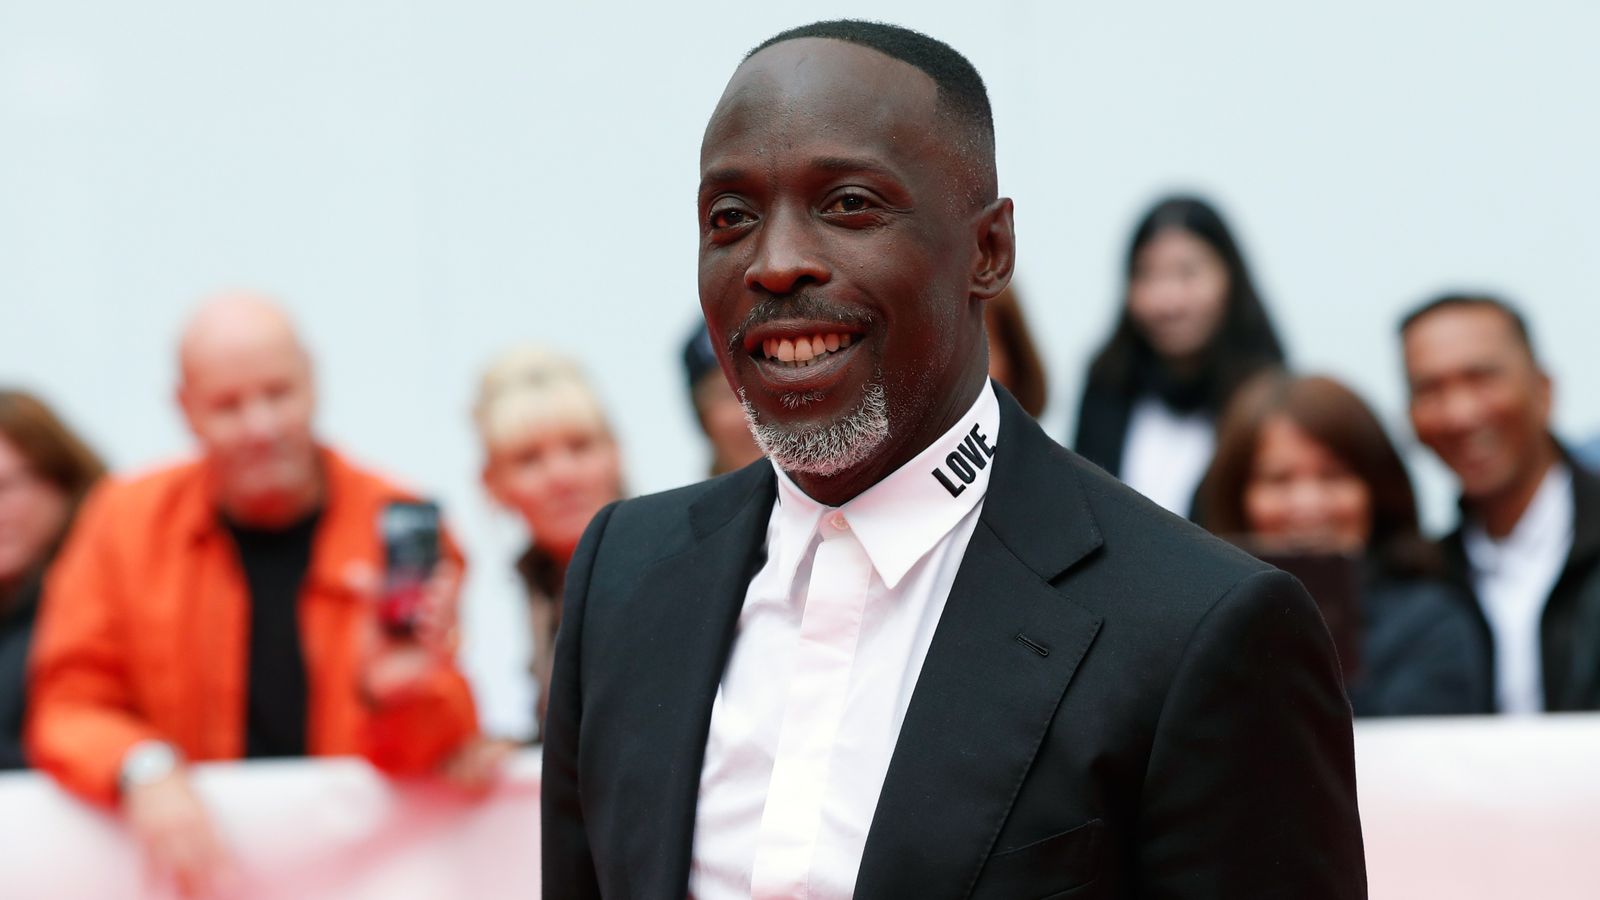 Michael K Williams death: Drug dealer pleads guilty to providing The Wire actor with fentanyl-laced heroin